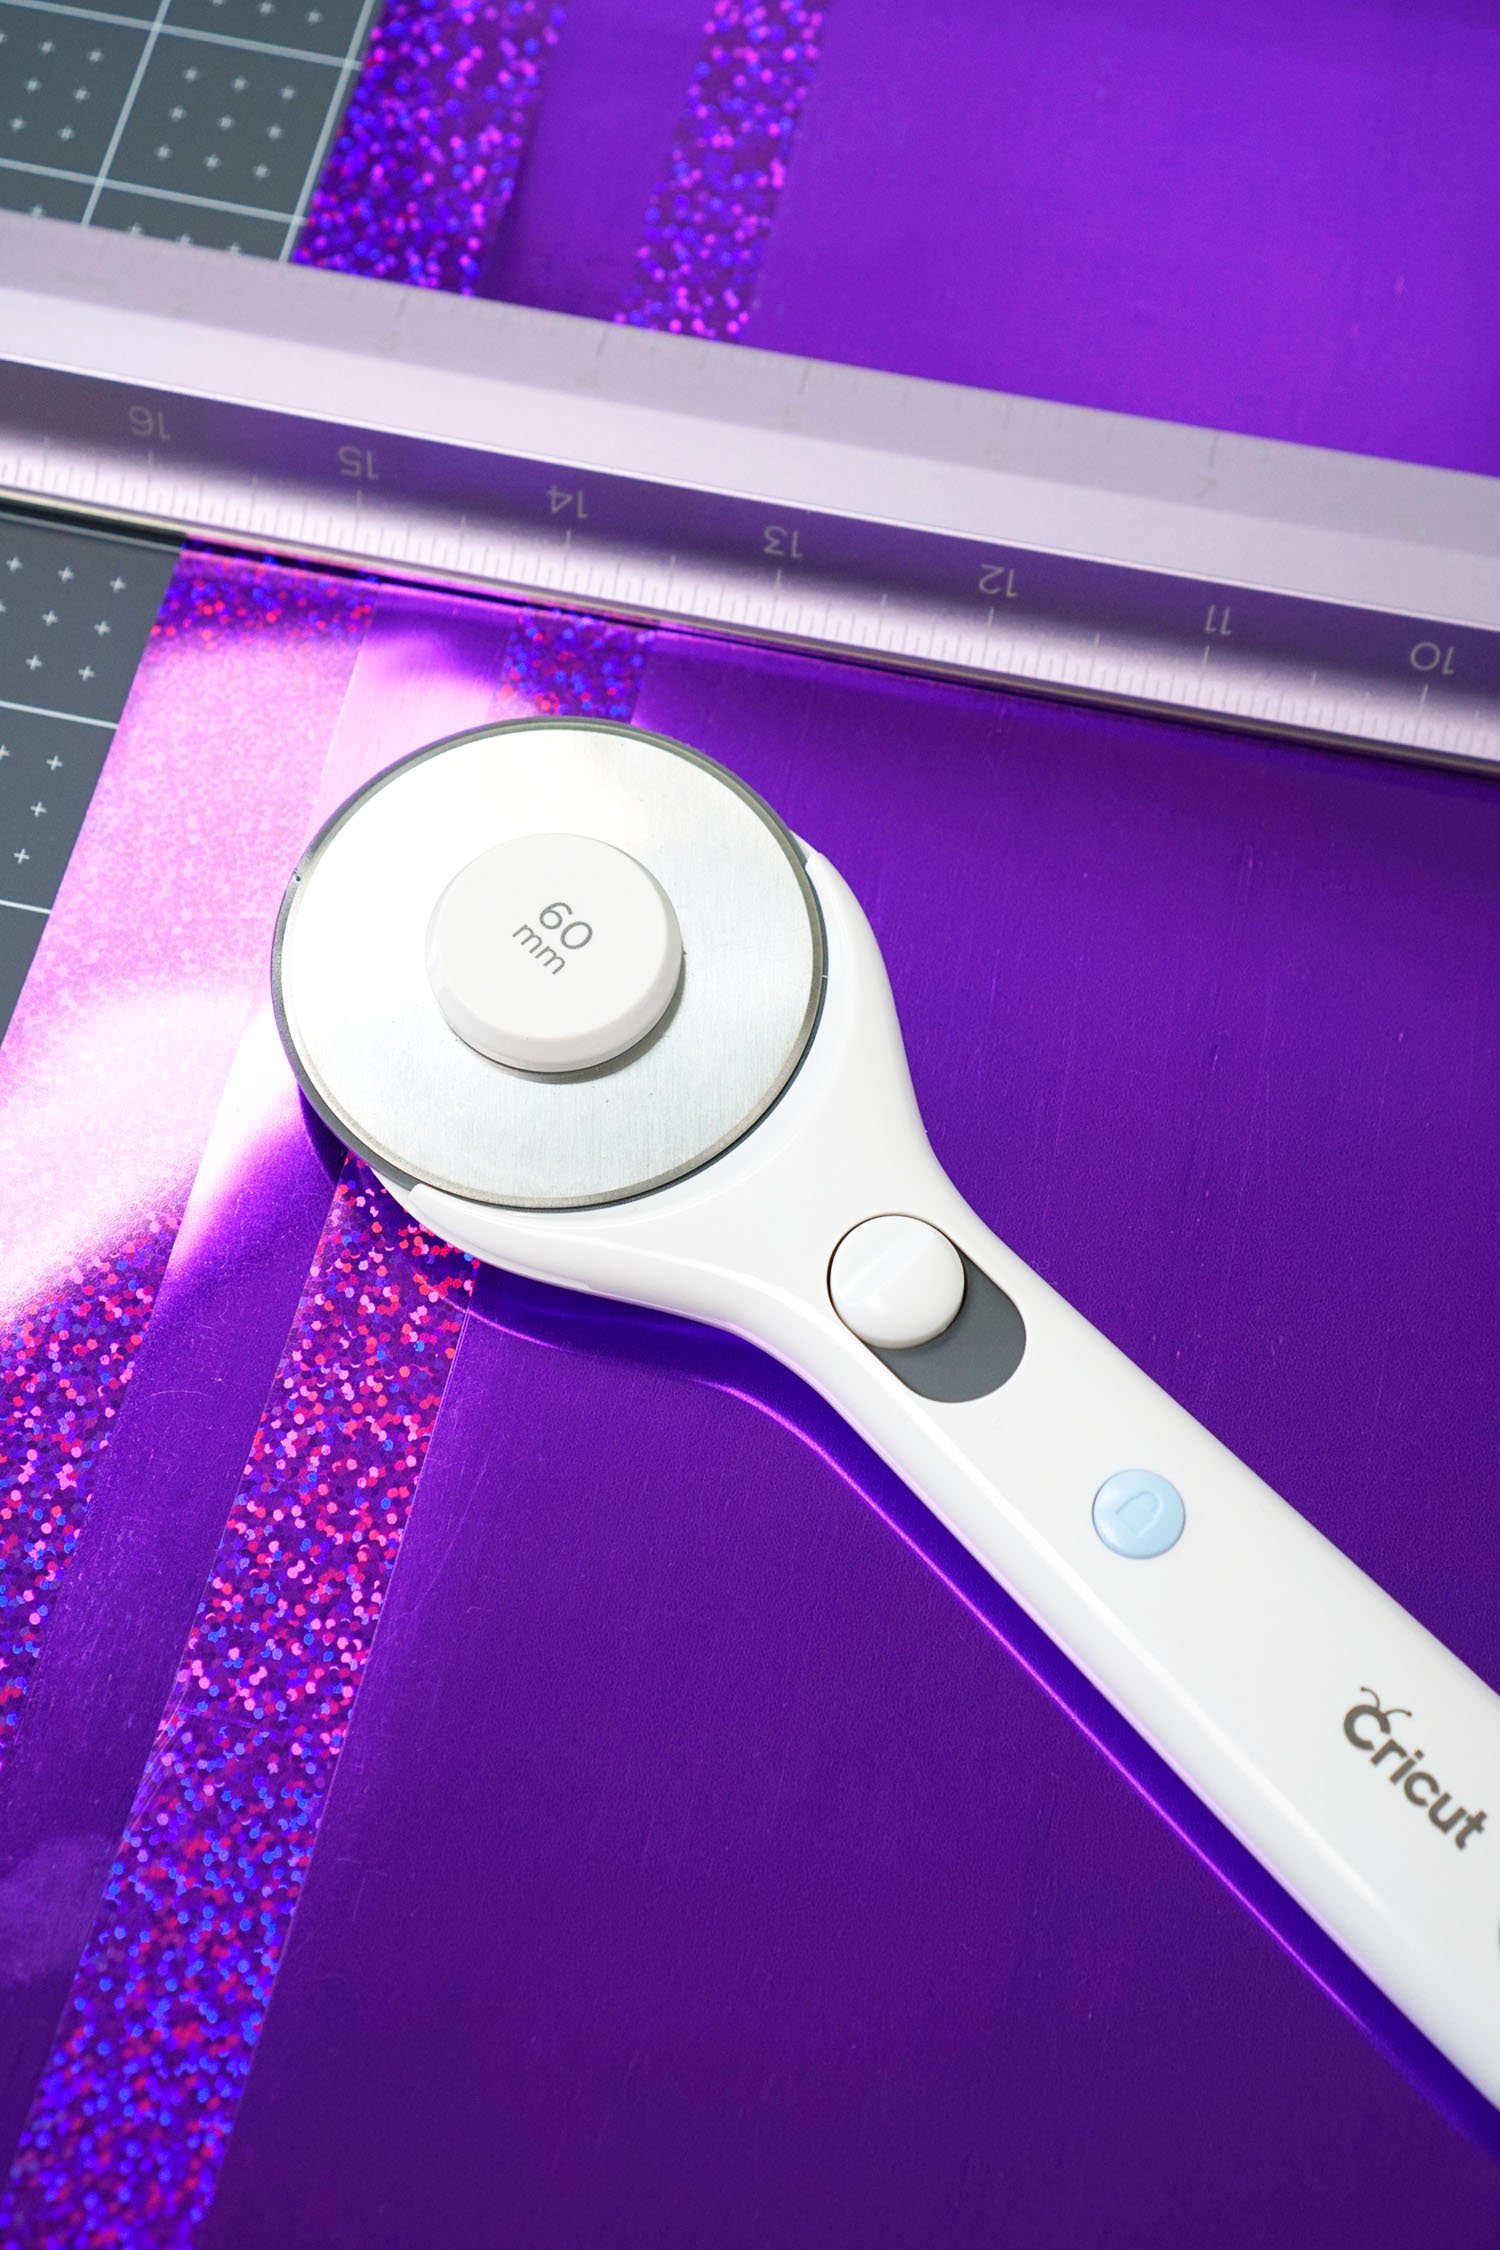 Cricut rotary tool and party foil